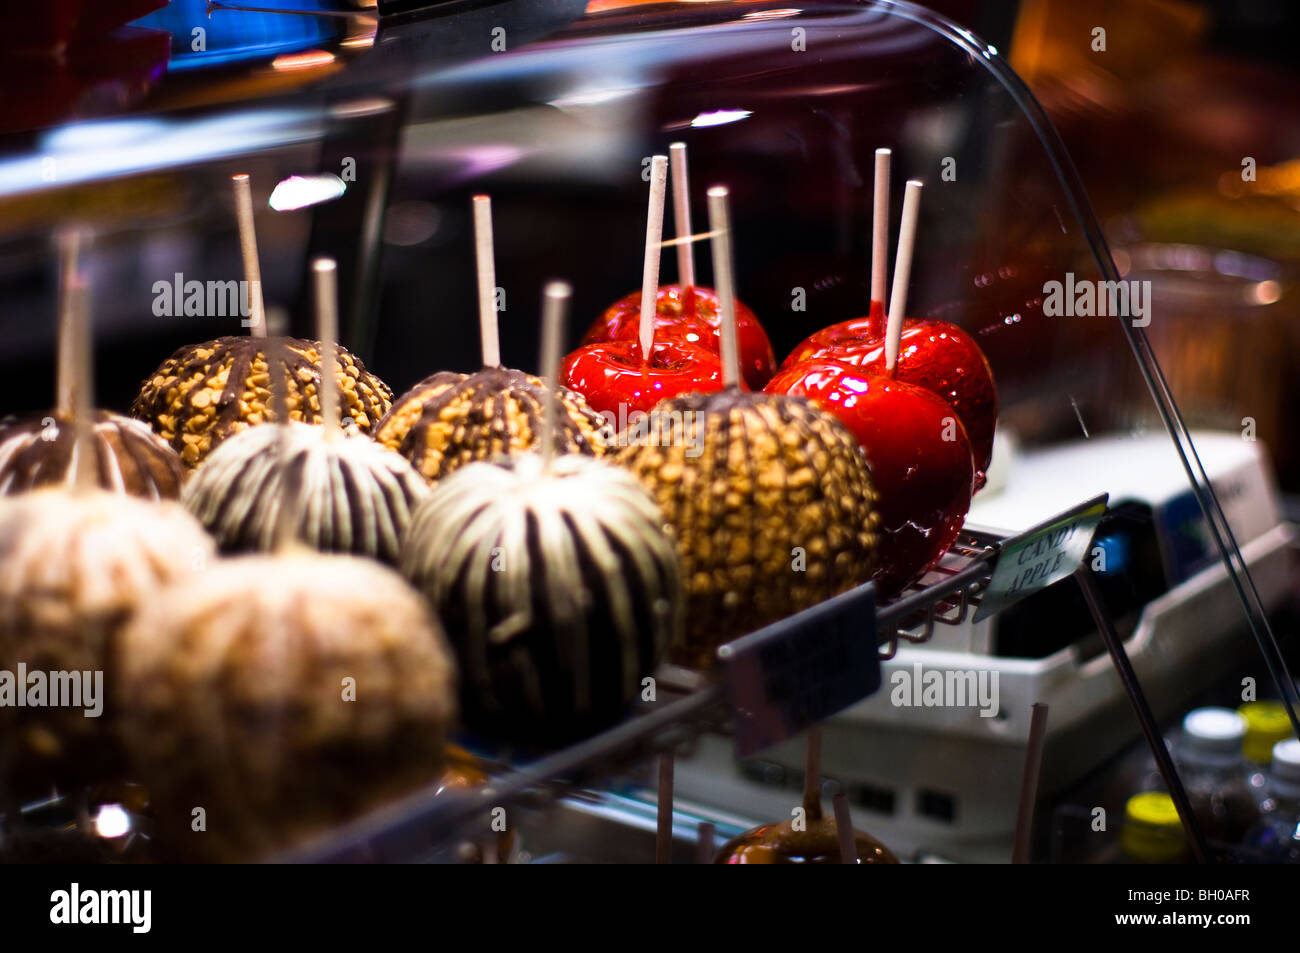 Candy apples on display at a stand in the New York New York hotel in Las Vegas. Stock Photo